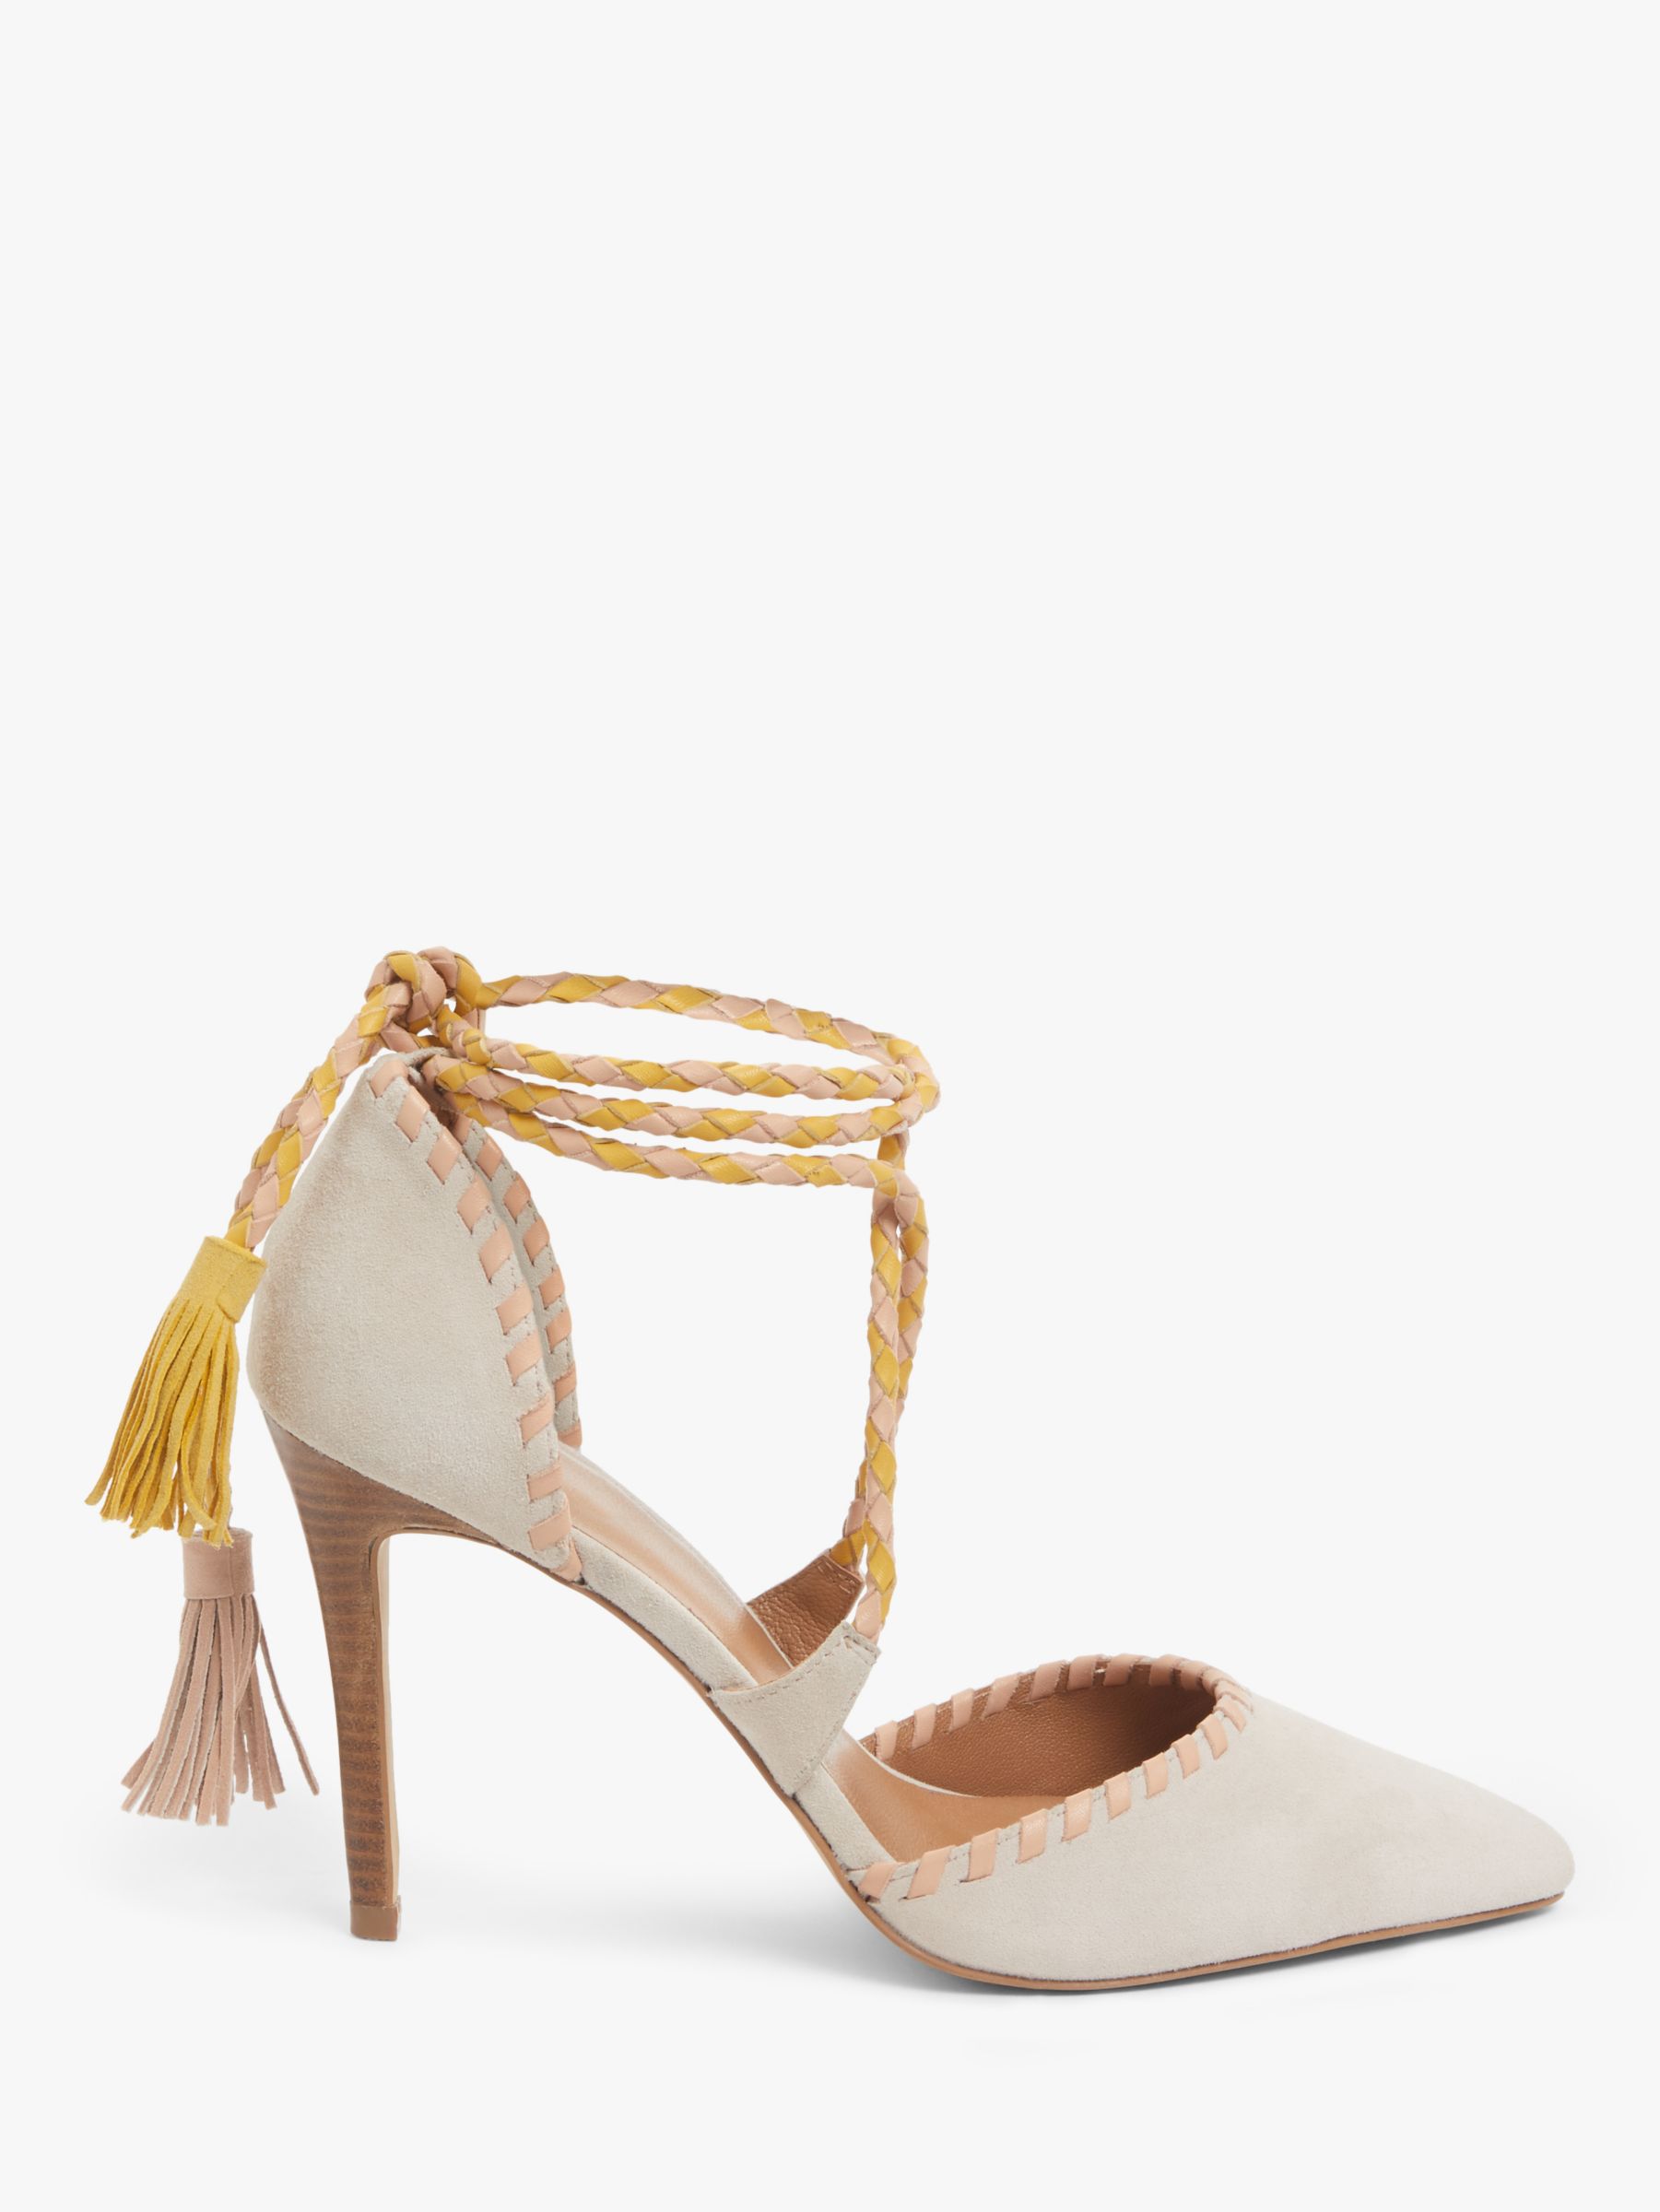 AND/OR Becka Suede Tassel Court Shoes